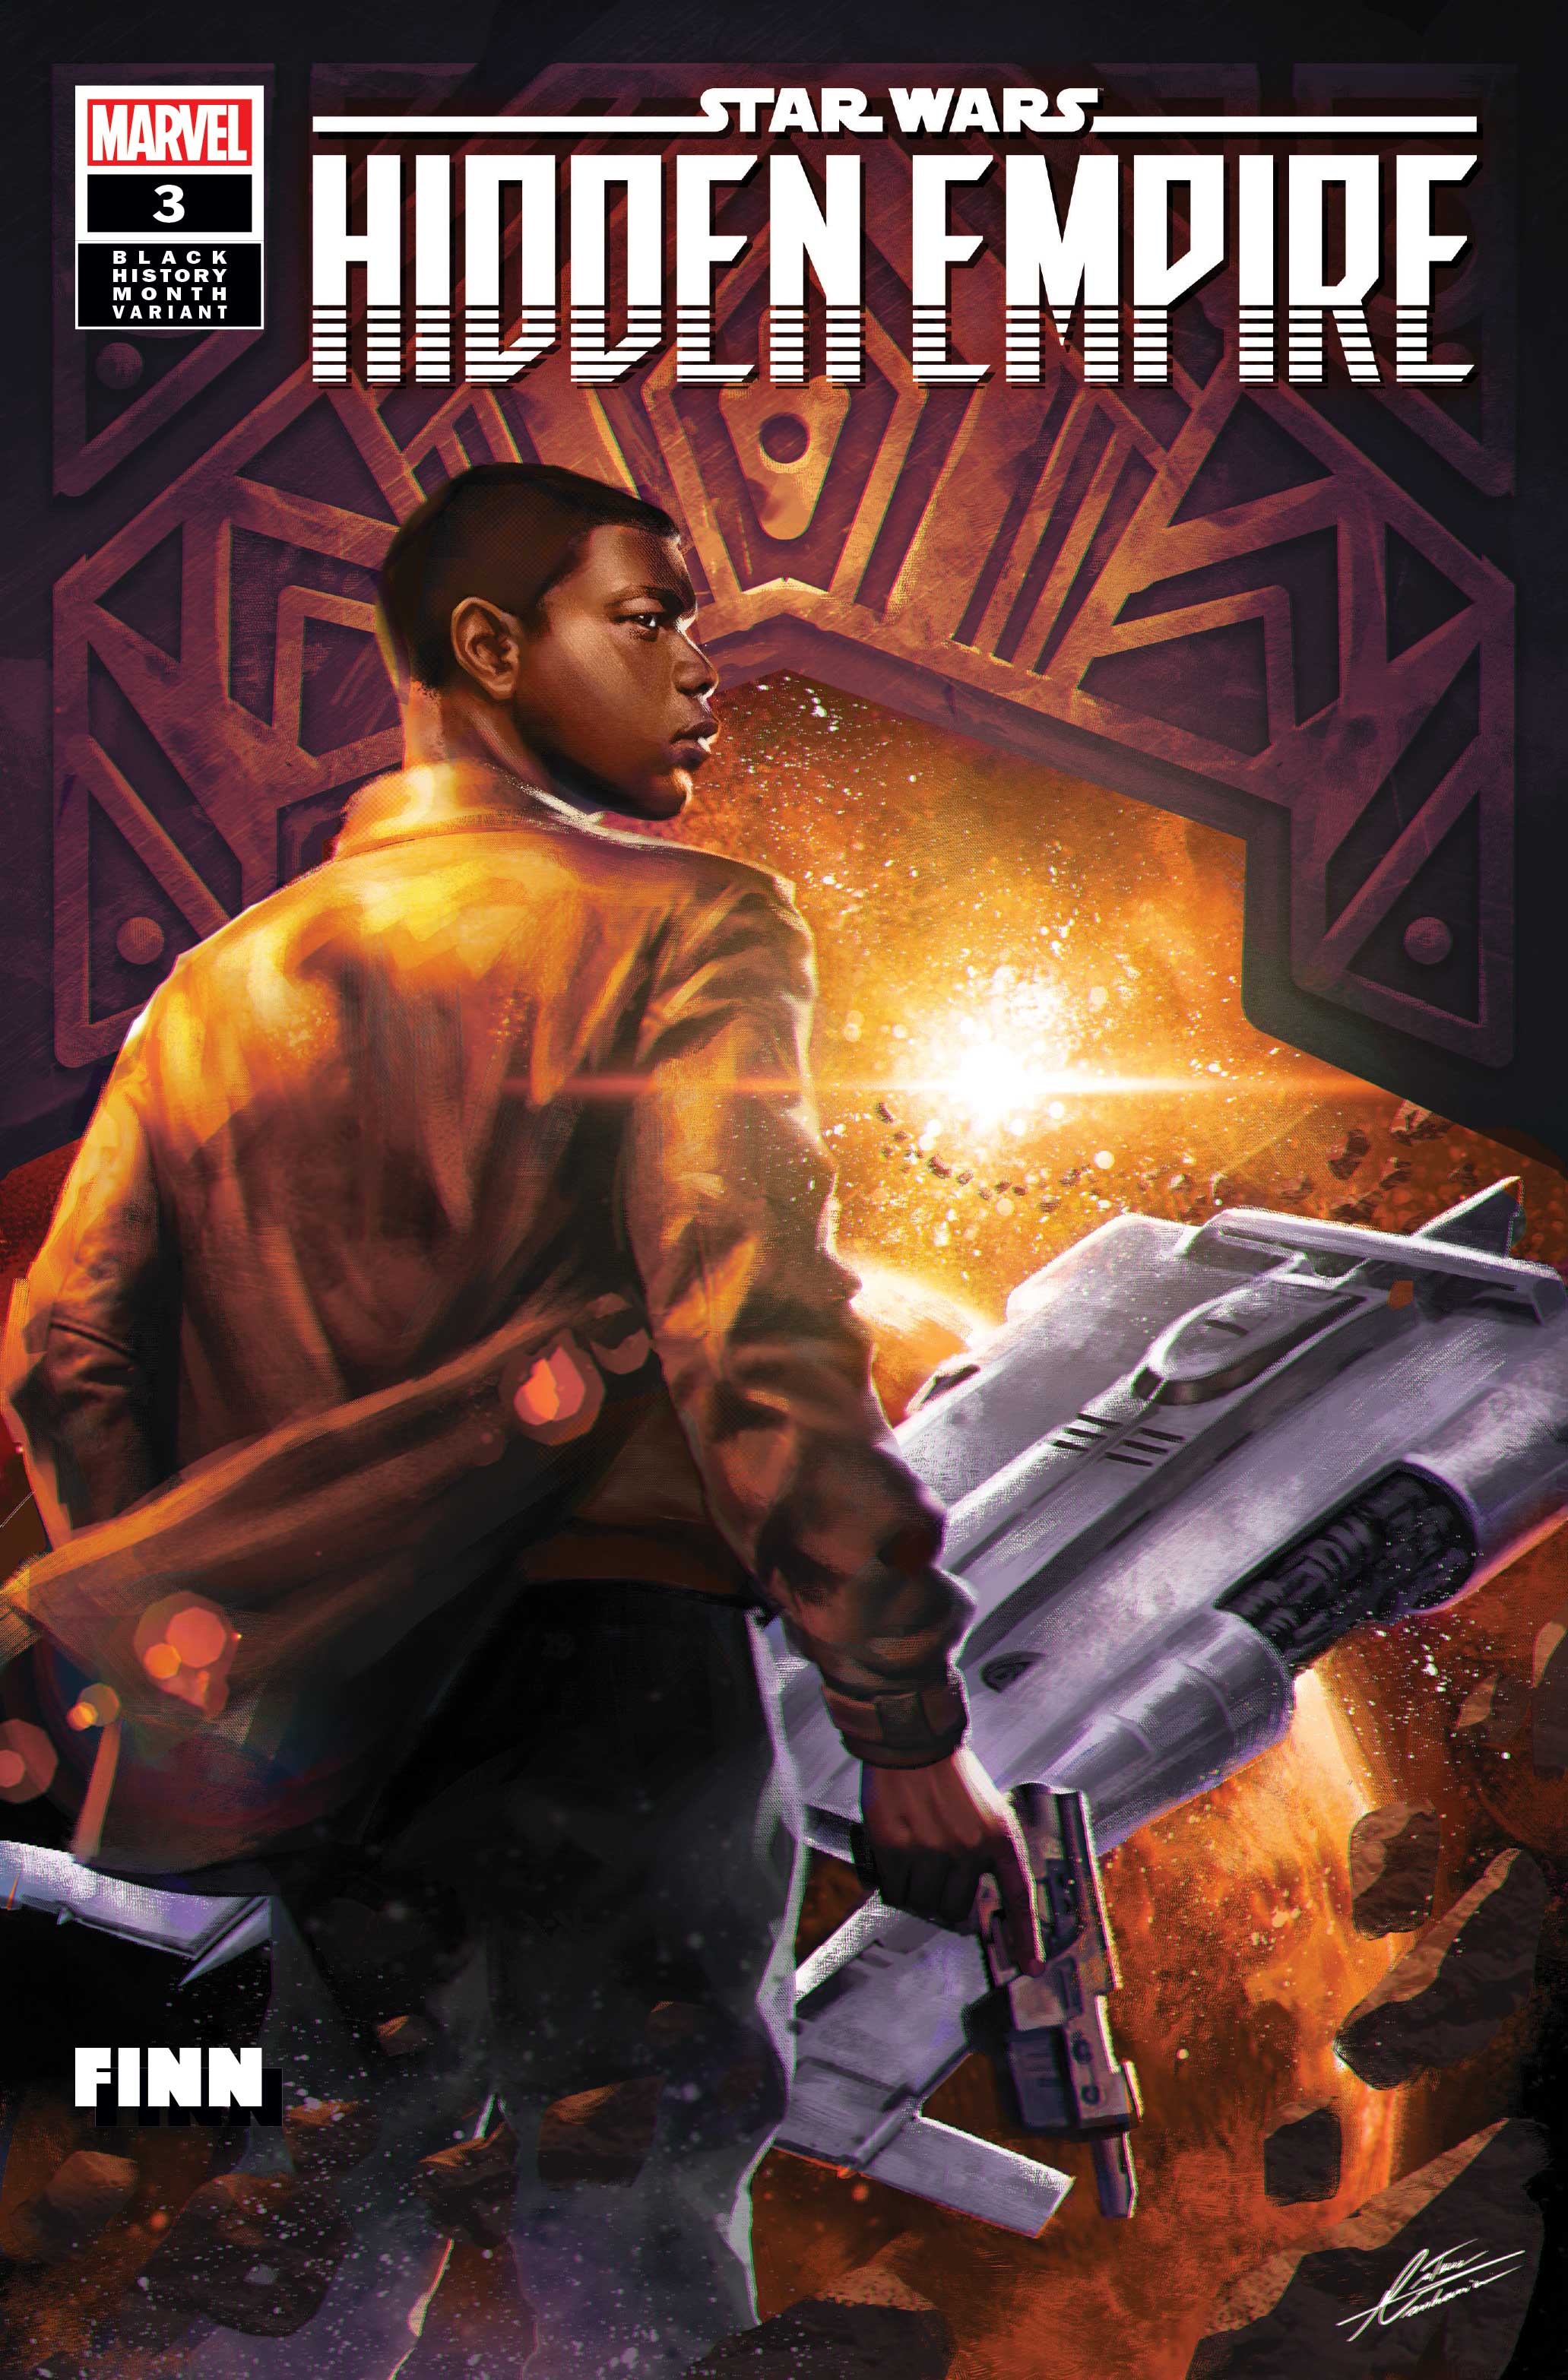 Cover of comic for Hidden Empire feaurting Finn holding a blaster turning back, in front of him is a large spaceship